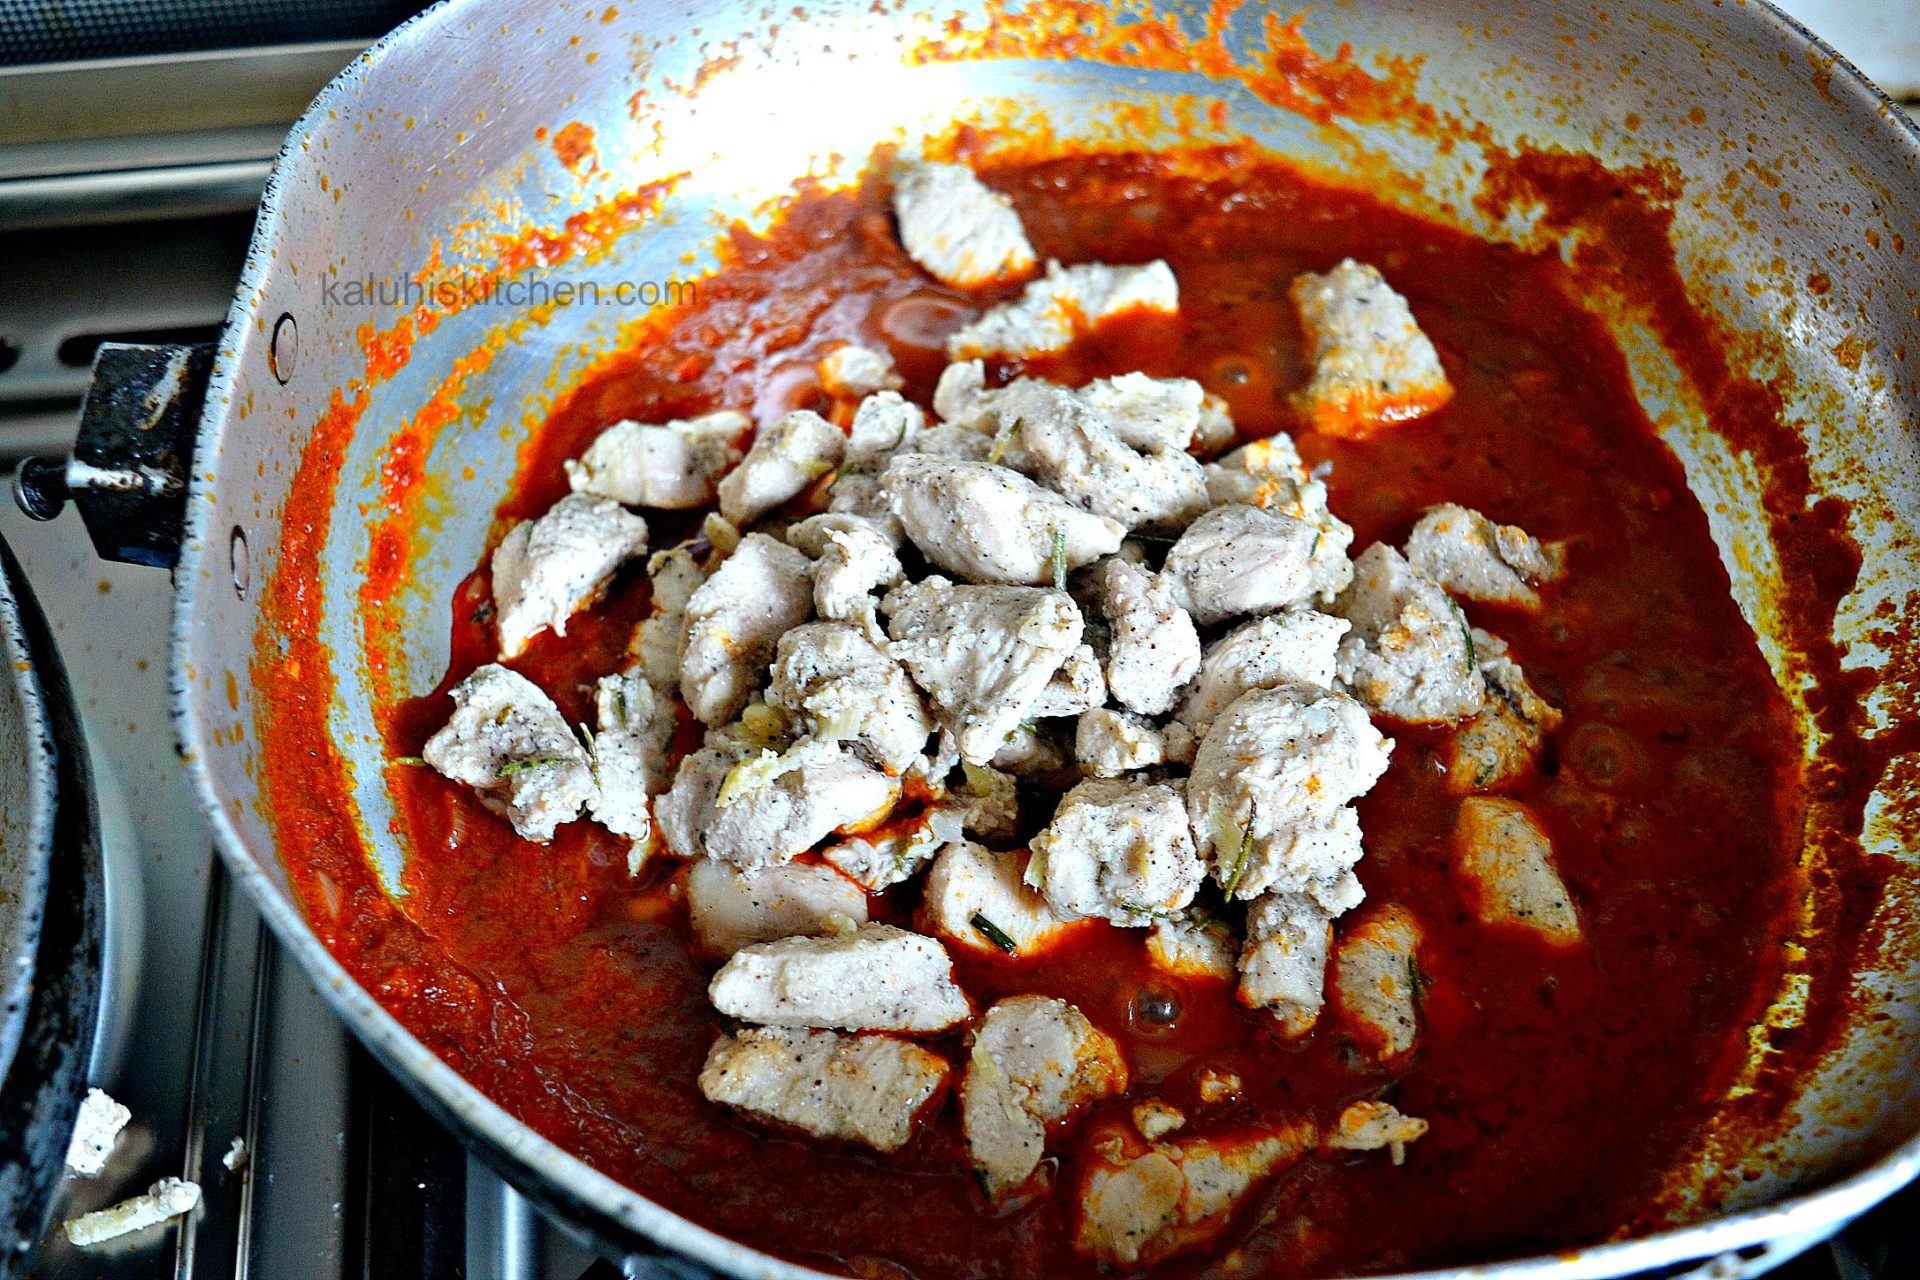 add the chicken to the masala sauce and allow it to simmer so that all the flavors amalgamate_chicken tikka from kaluhiskitchen.com